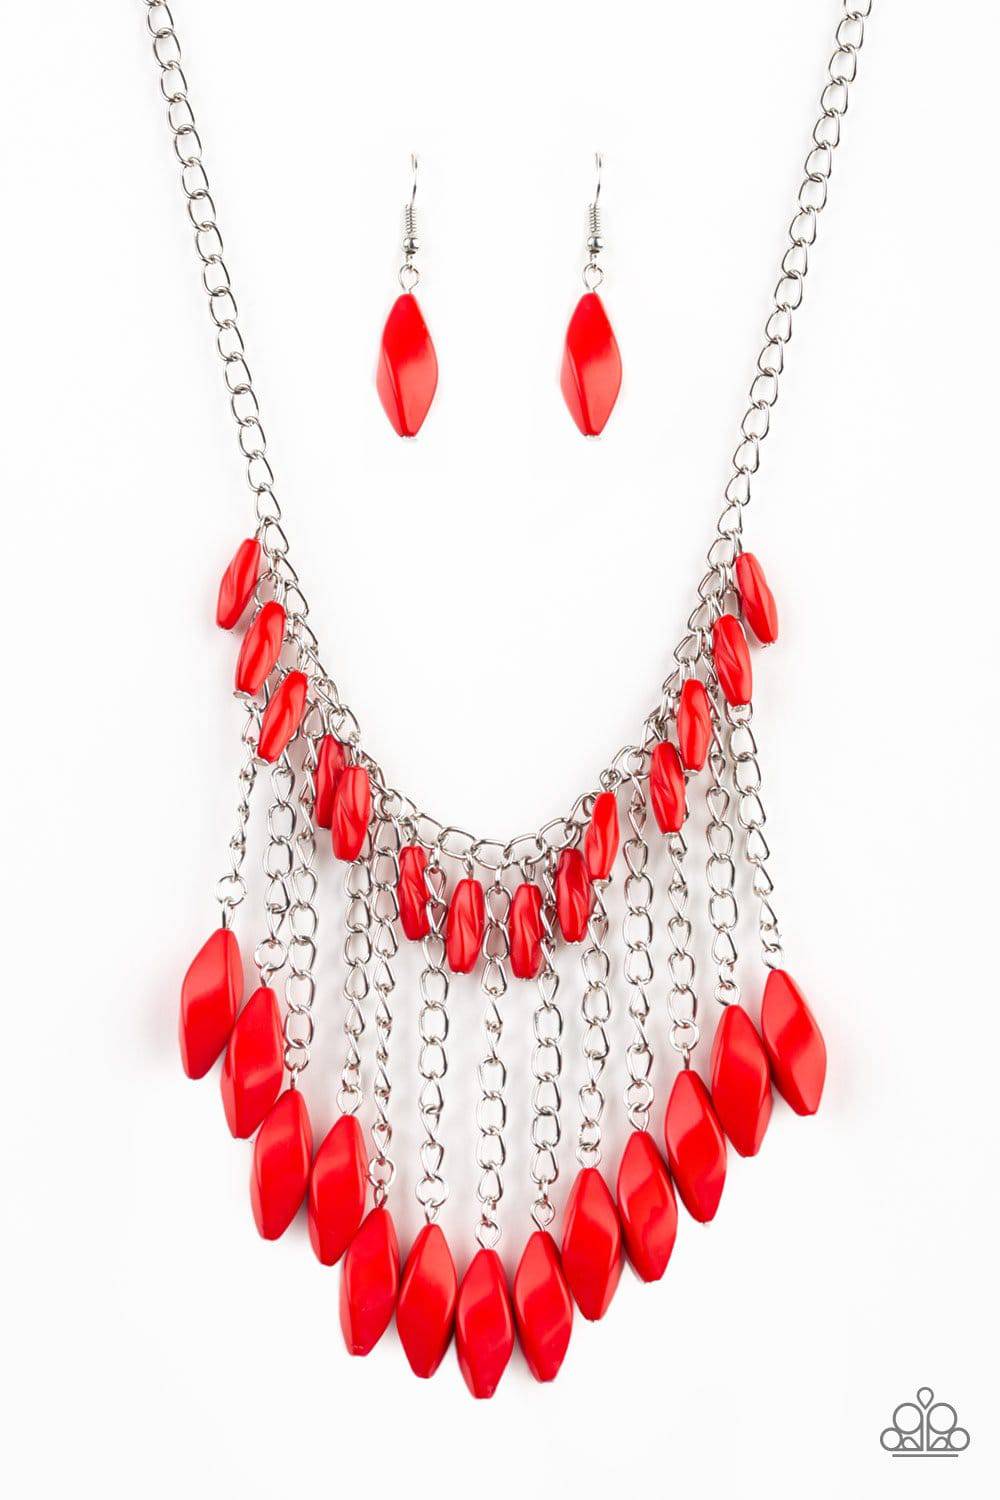 Venturous Vibes - Red & Silver Bead Necklace - Paparazzi Accessories - GlaMarous Titi Jewels